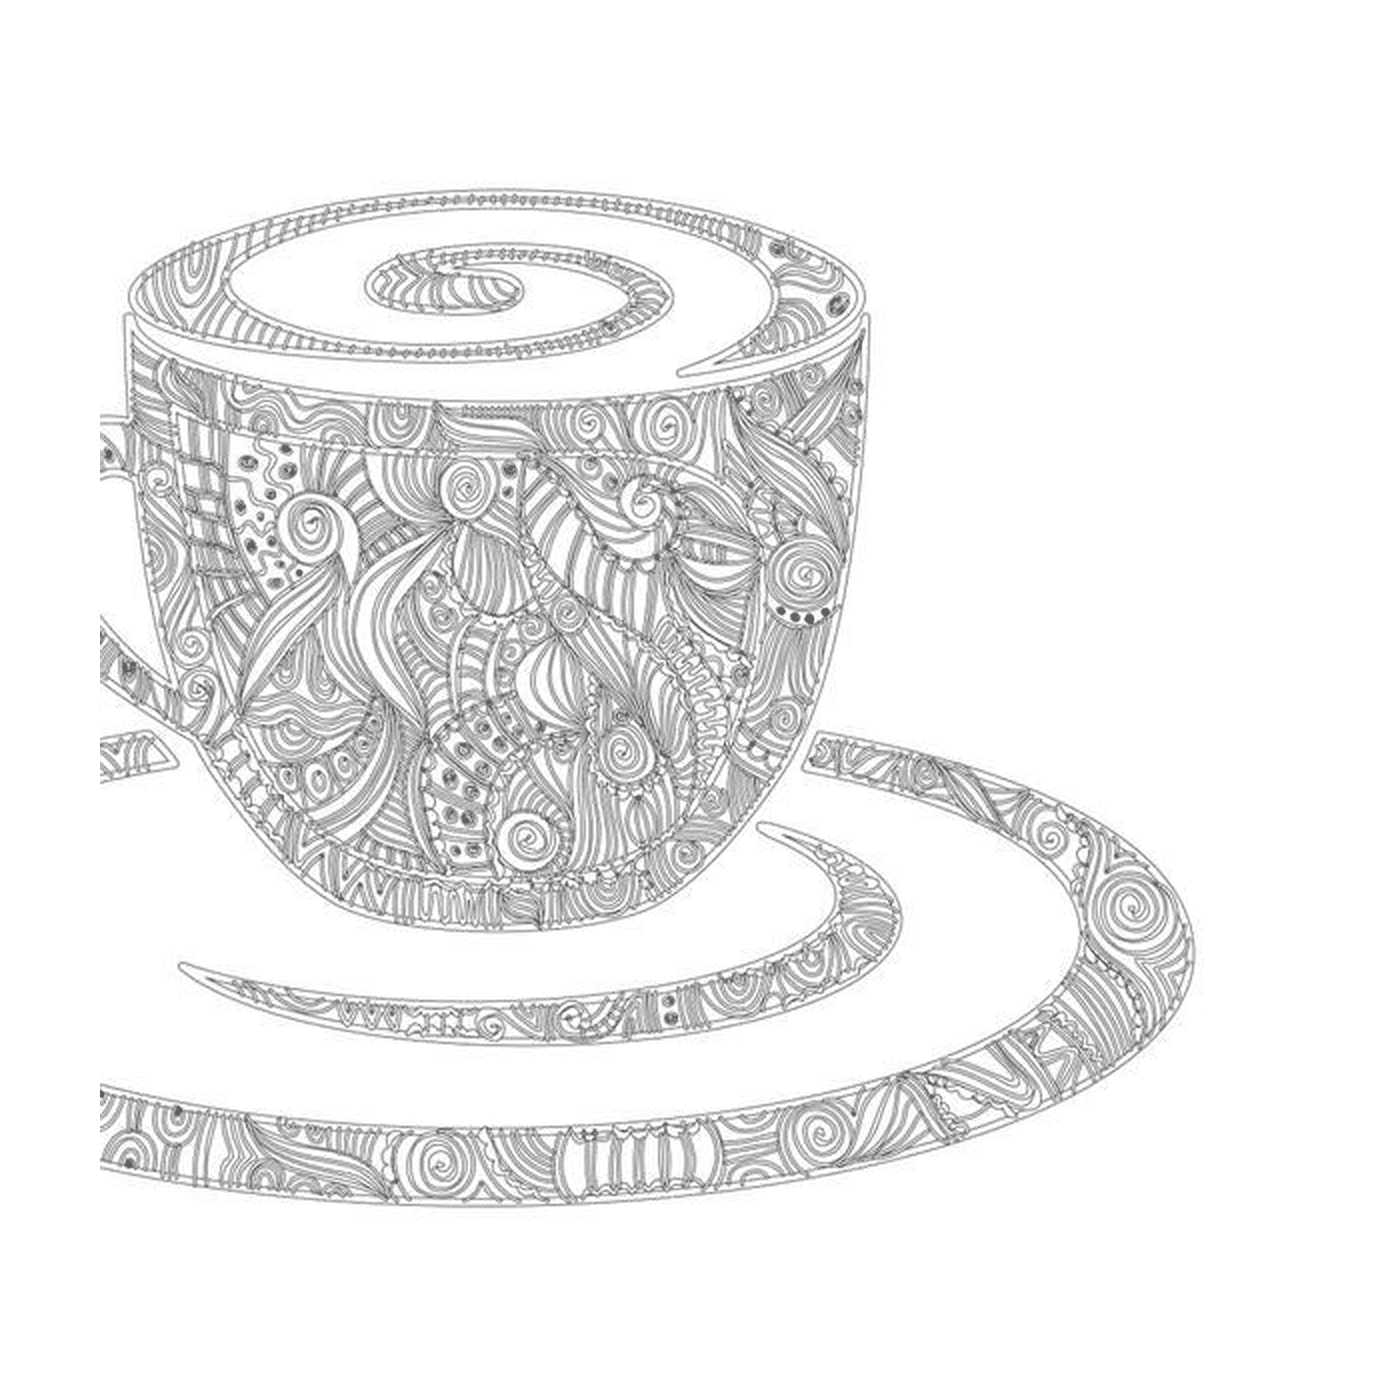  A coffee mandala with a decorated cup 